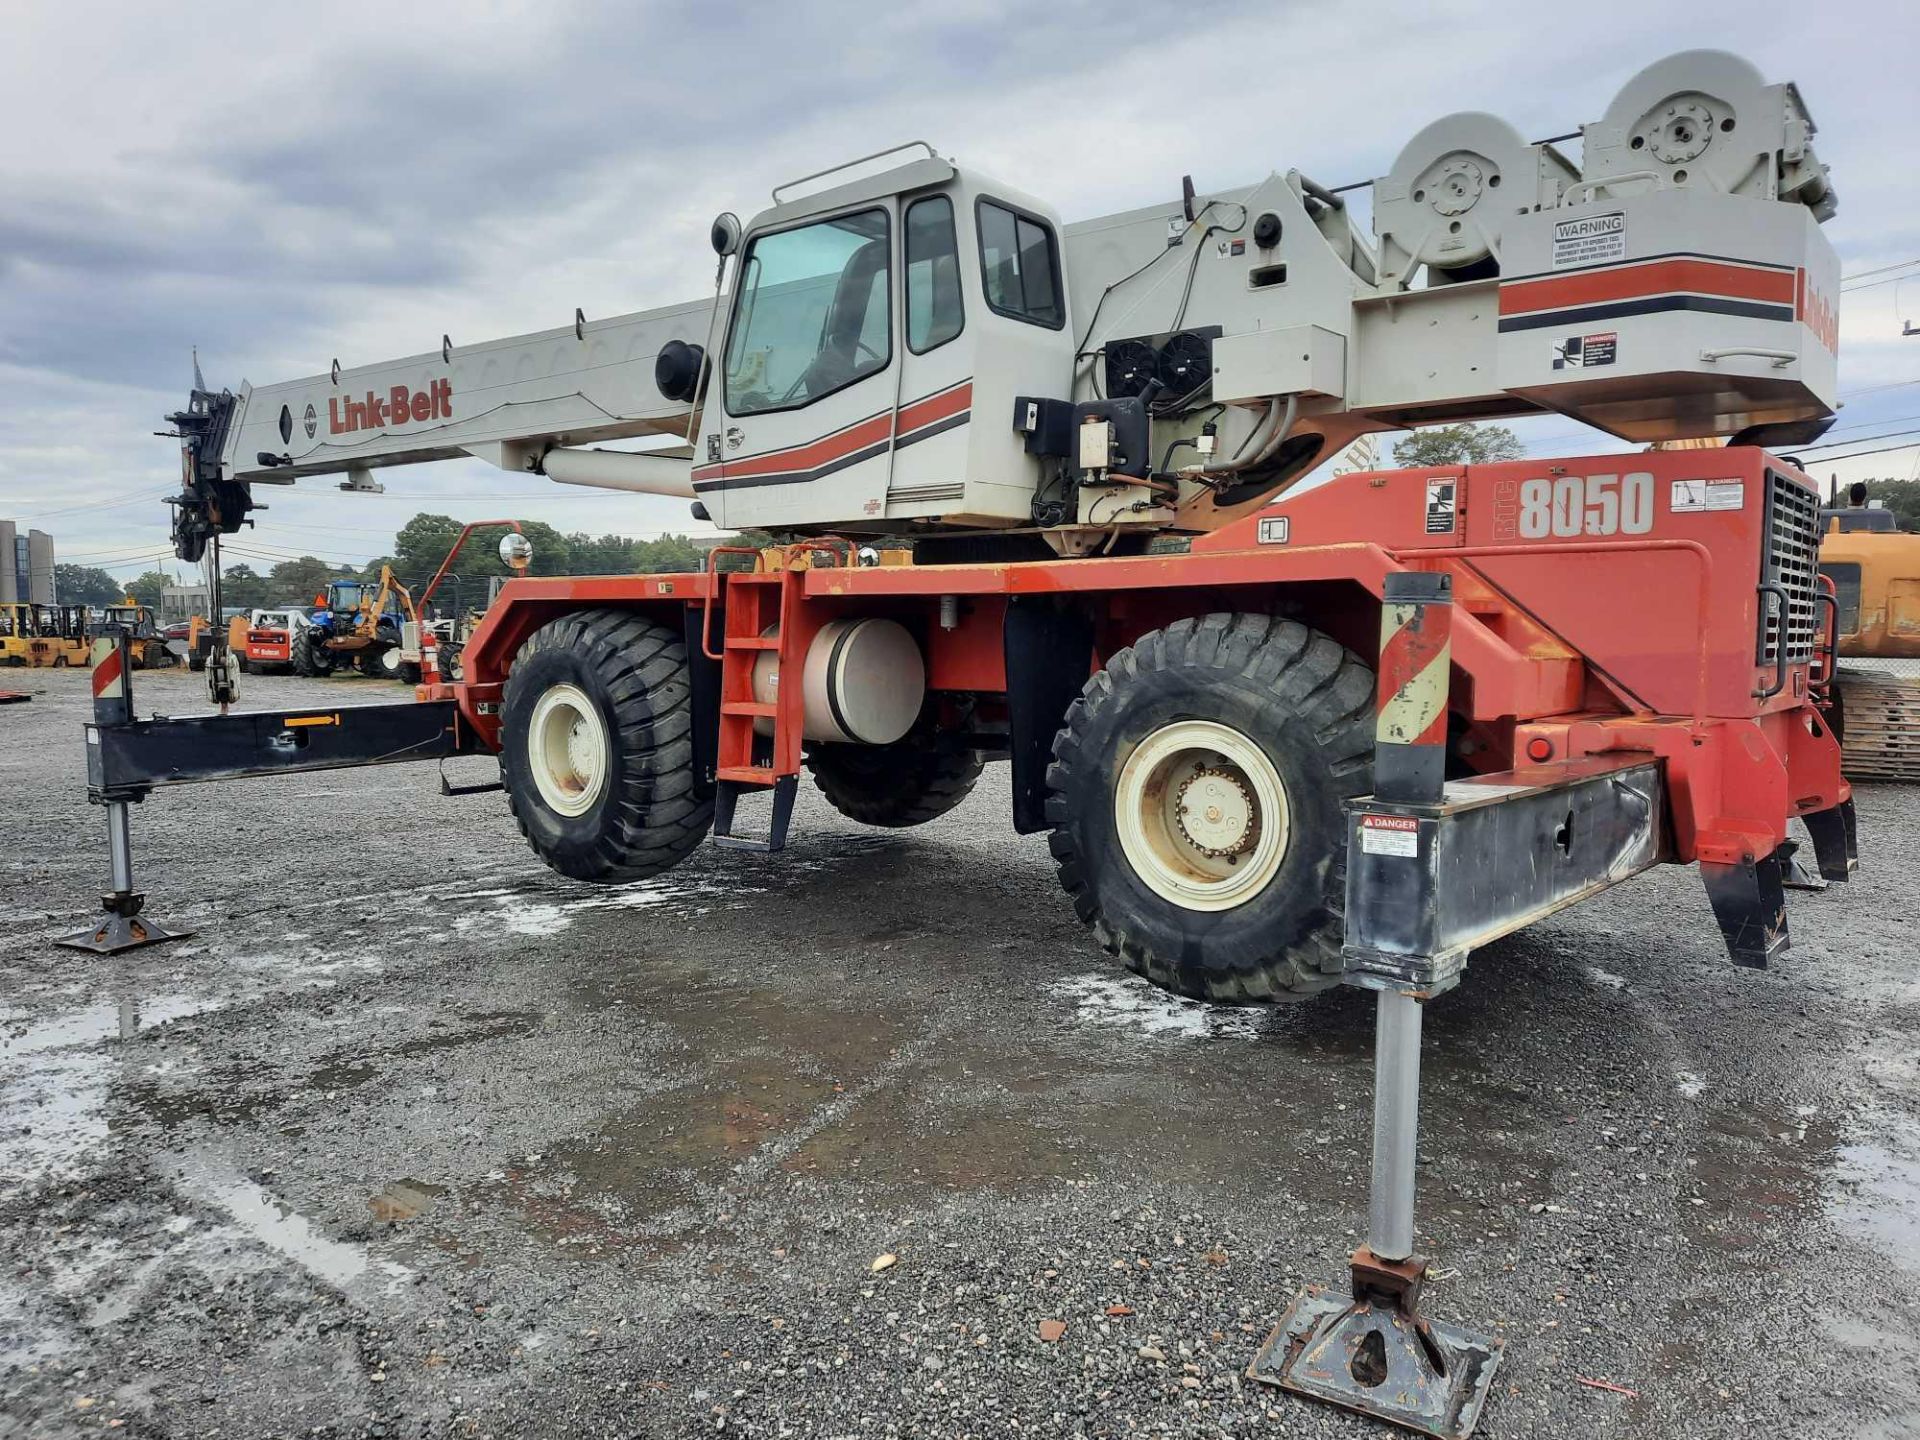 (SUBJECT TO OWNER CONFIRMATION) 2007 Link-Belt RTC8050 Series II Rough Terrain Crane - Image 16 of 78